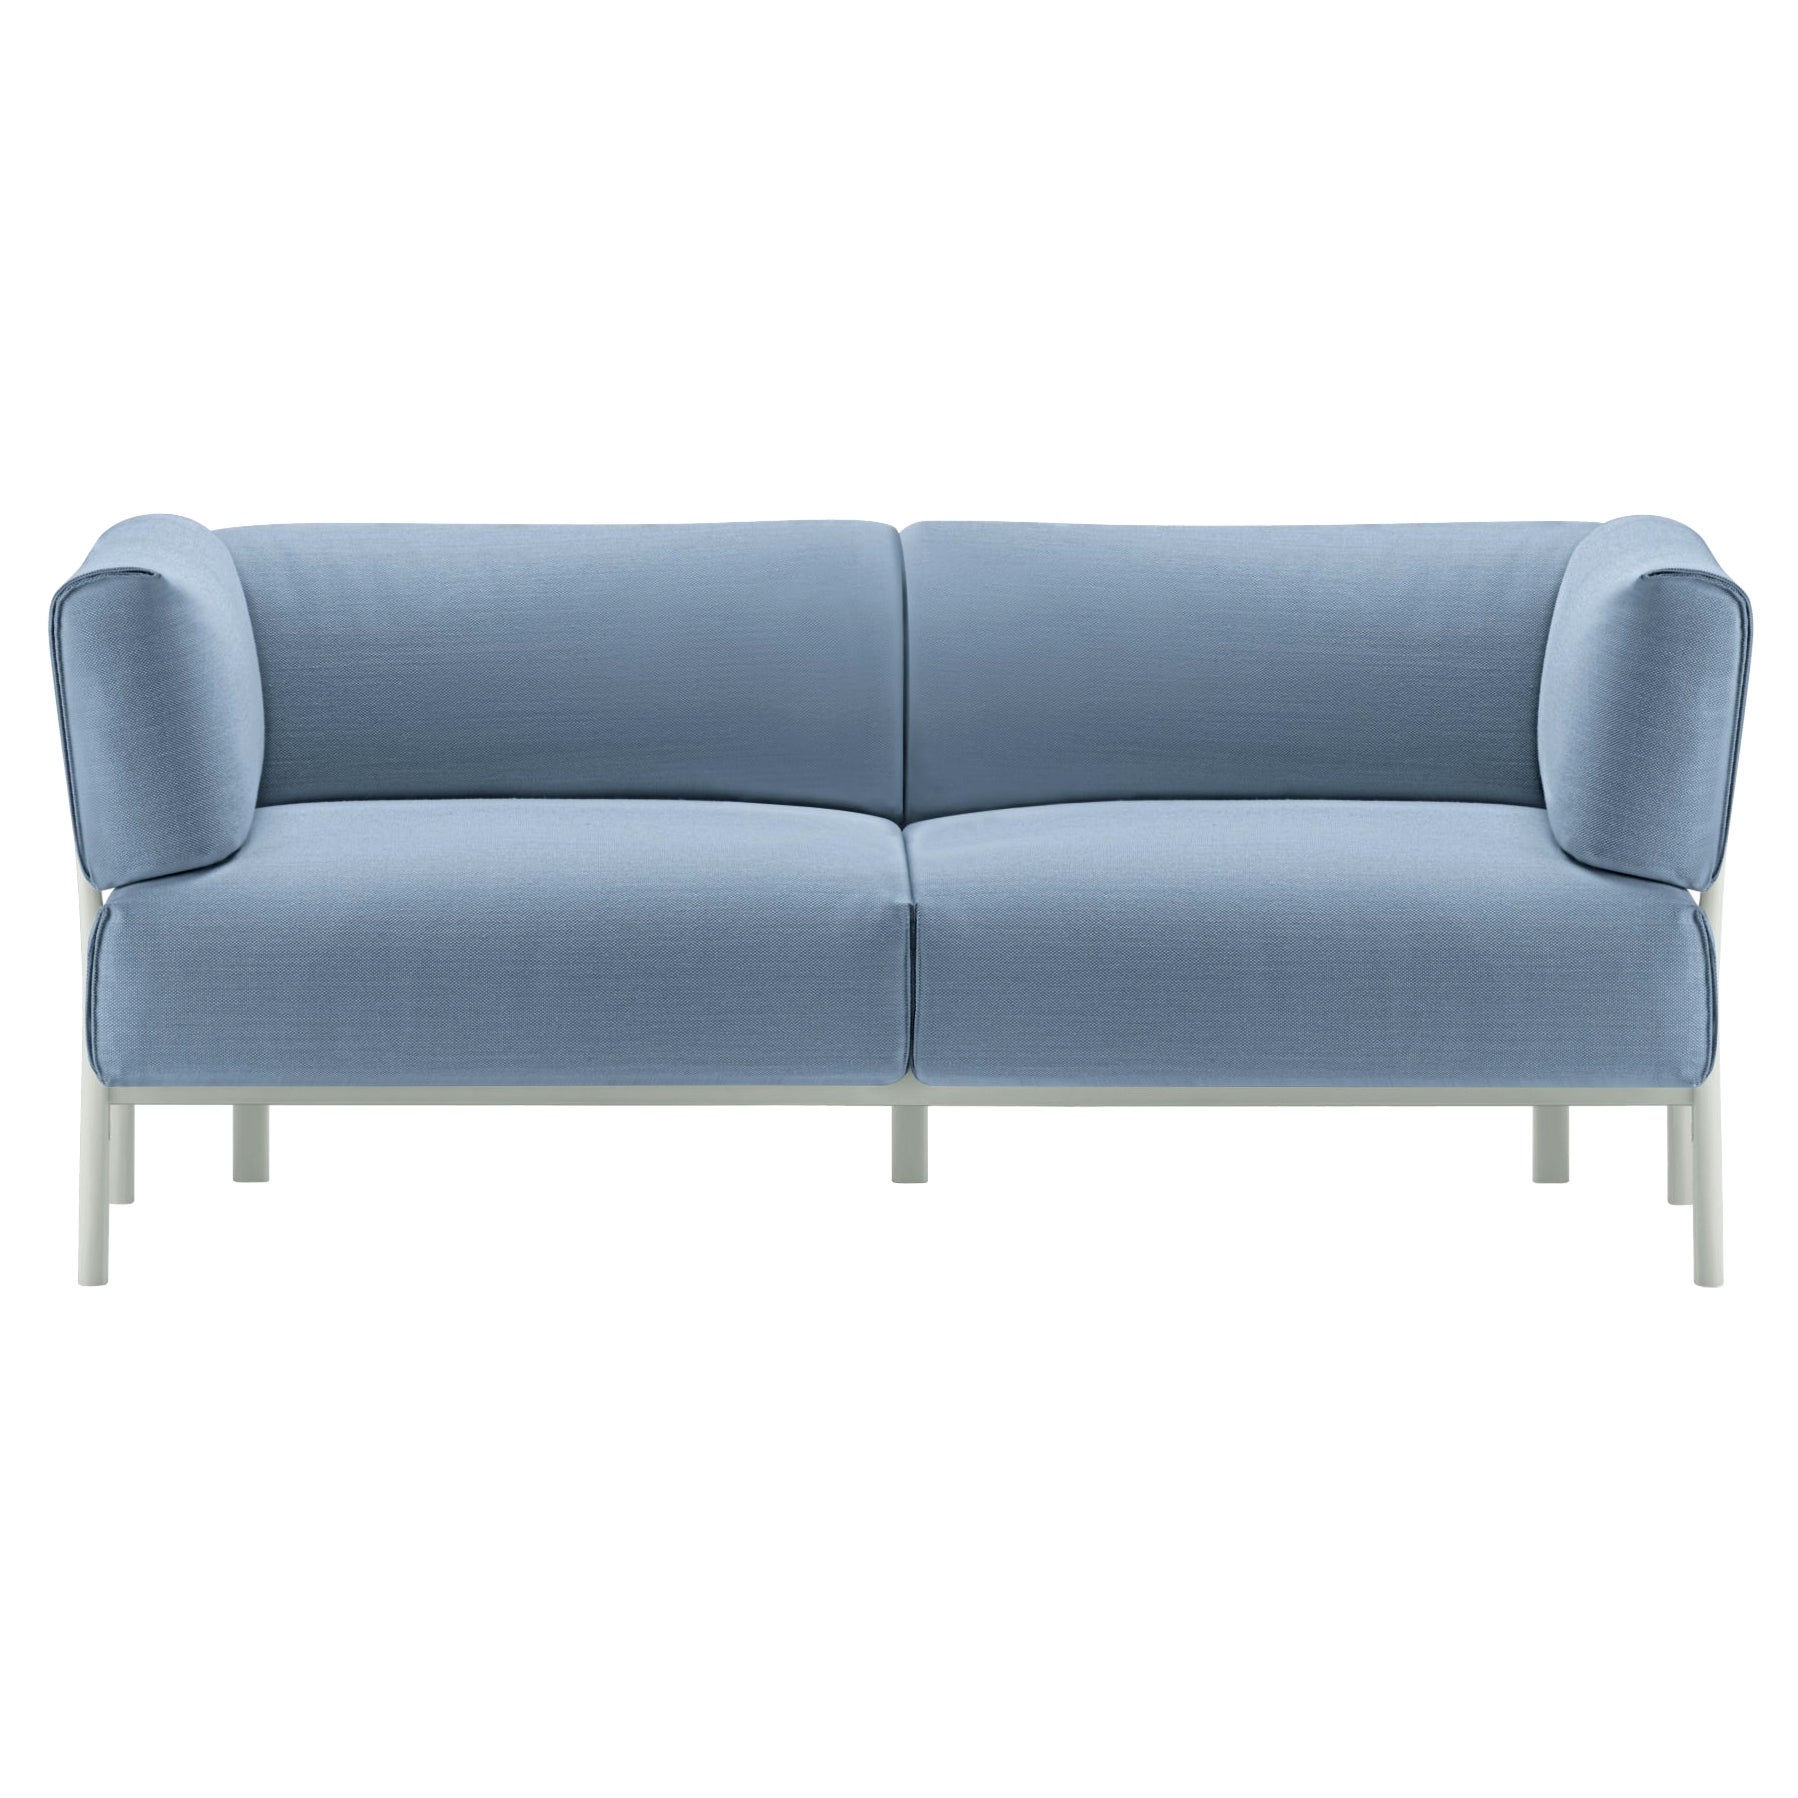 Alias 861 Eleven Sofa 2 Seater in Blue Seat and White Lacquered Aluminum Frame